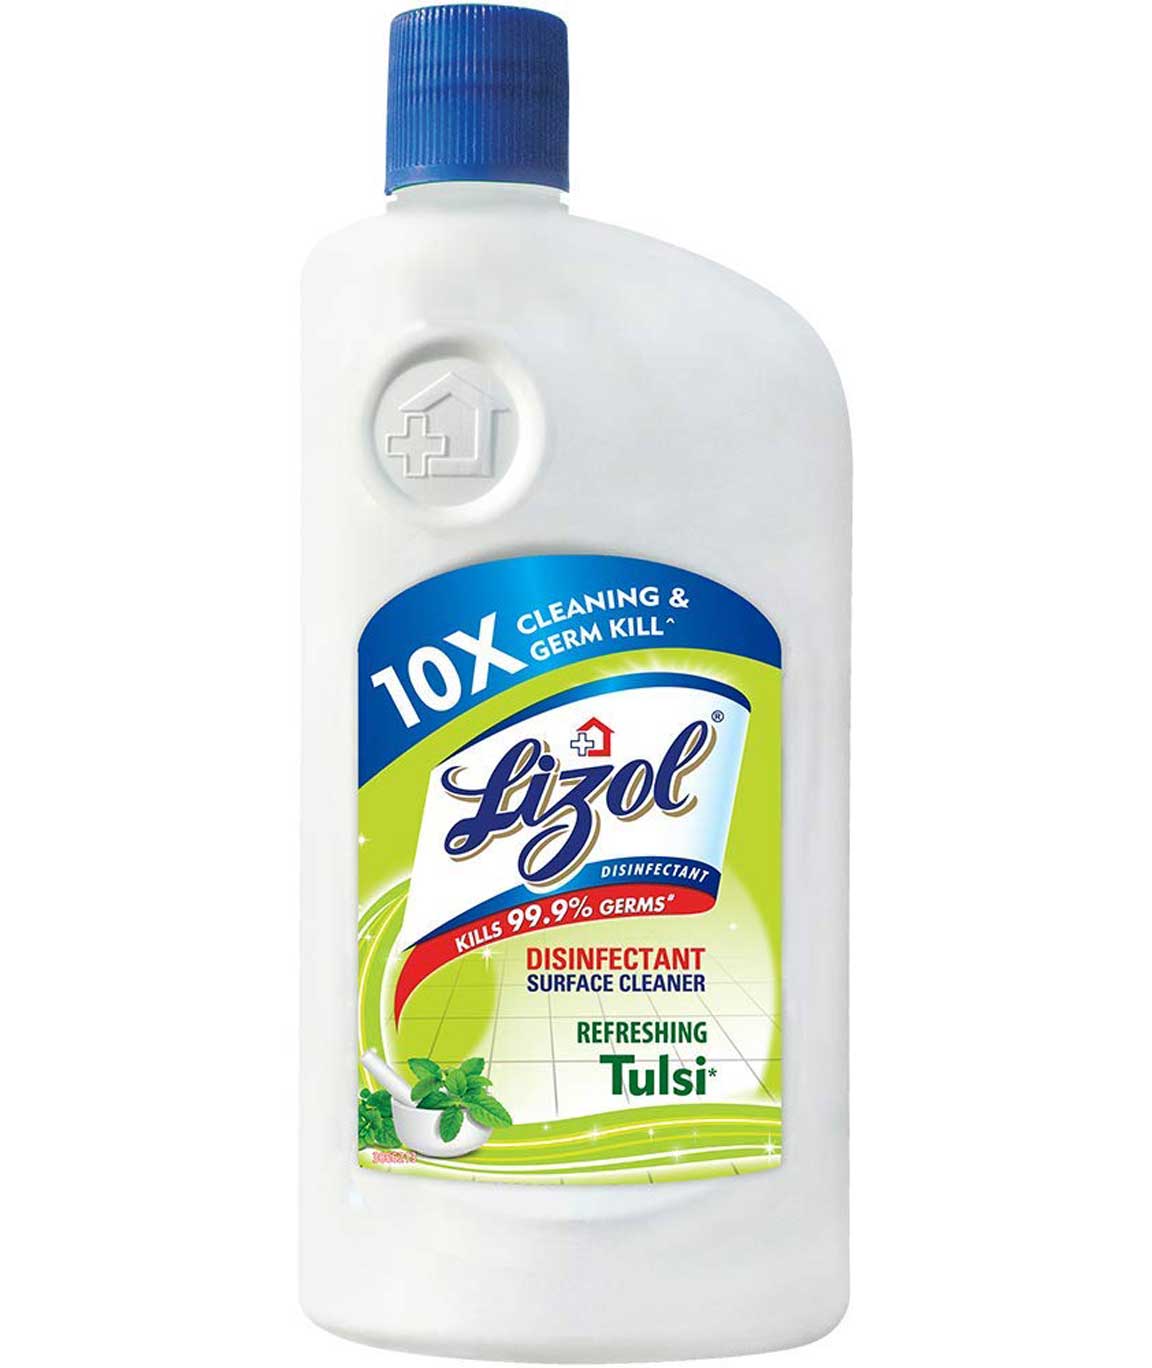 Lizol Disinfectant Surface and Floor Cleaner - 975 ml (Tulsi)